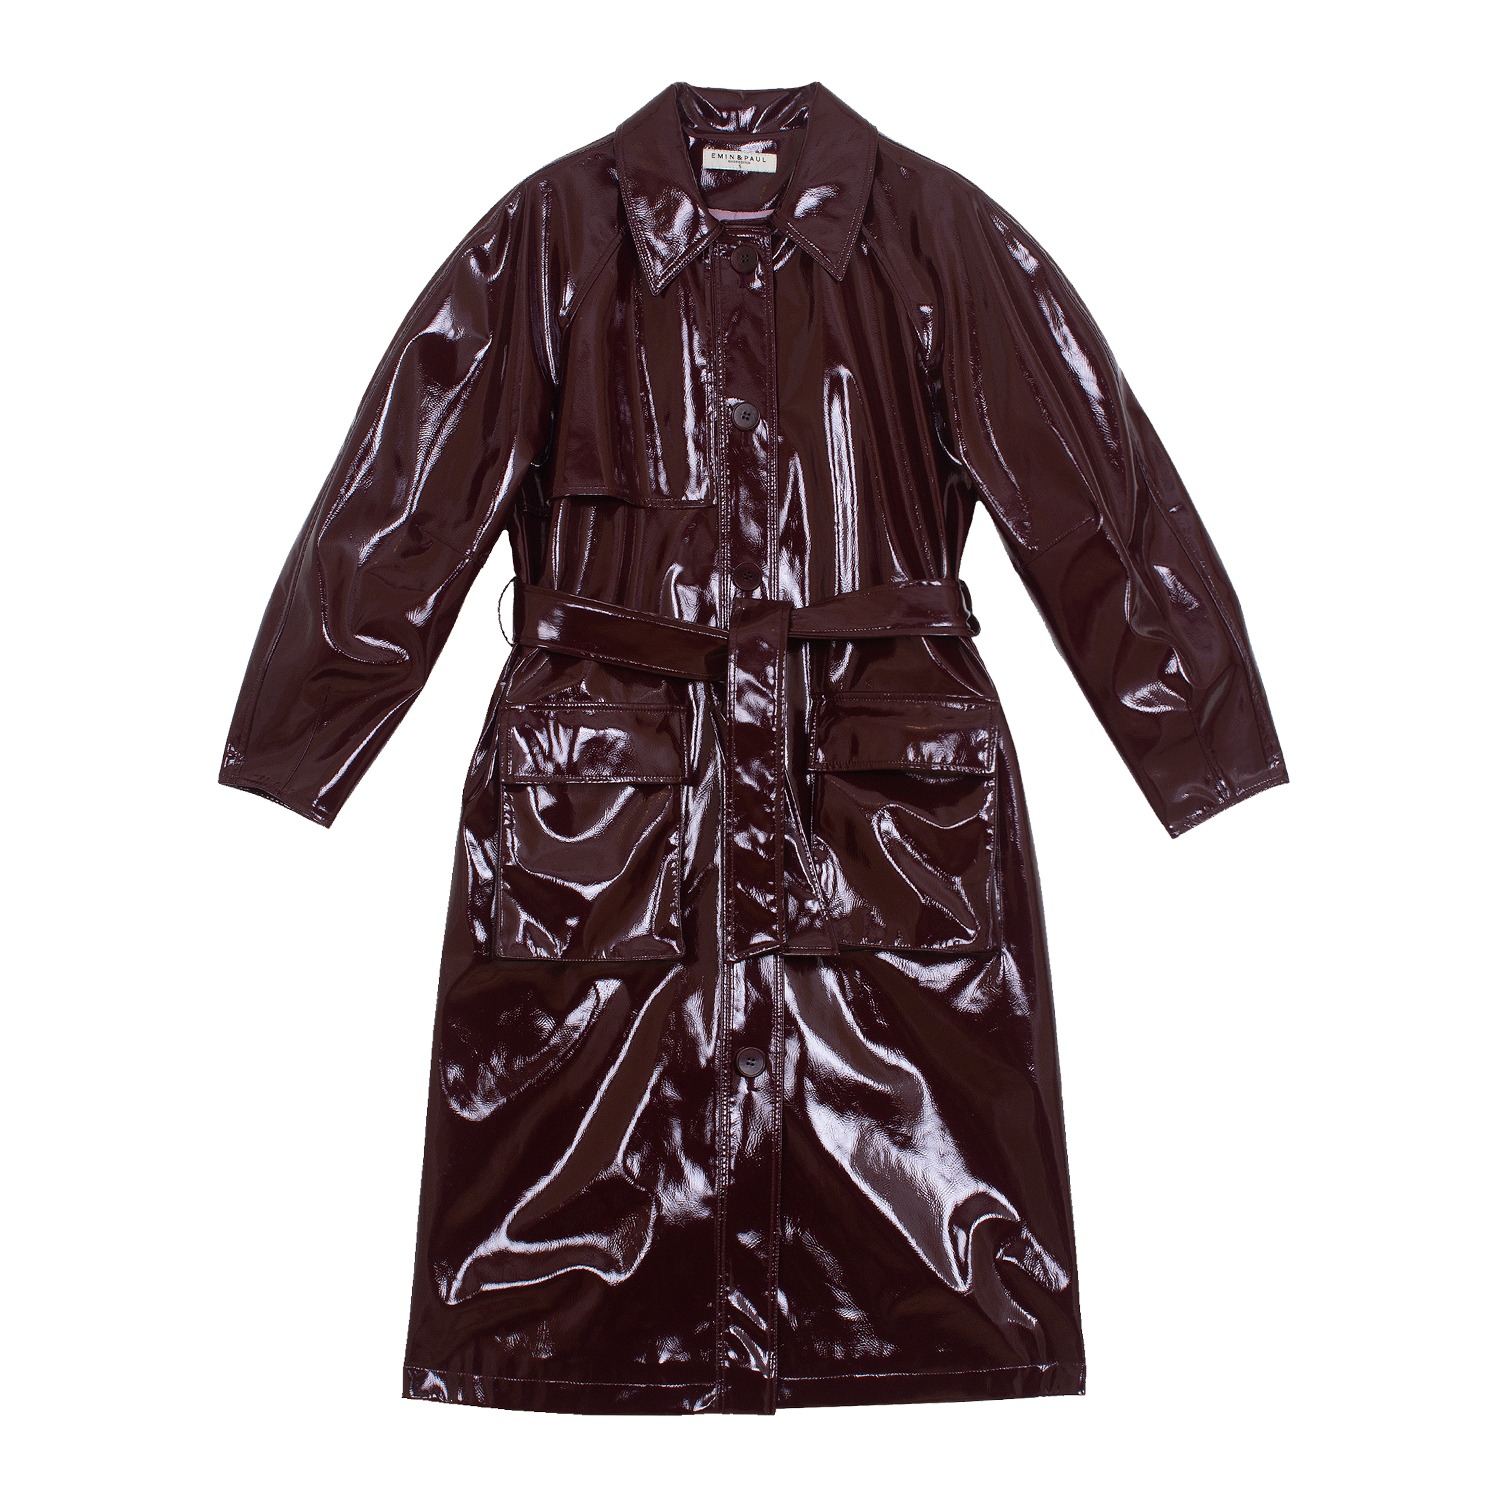 Beyond Retro Burgundy Faux Patent Leather Trench Coat by Emin + Paul